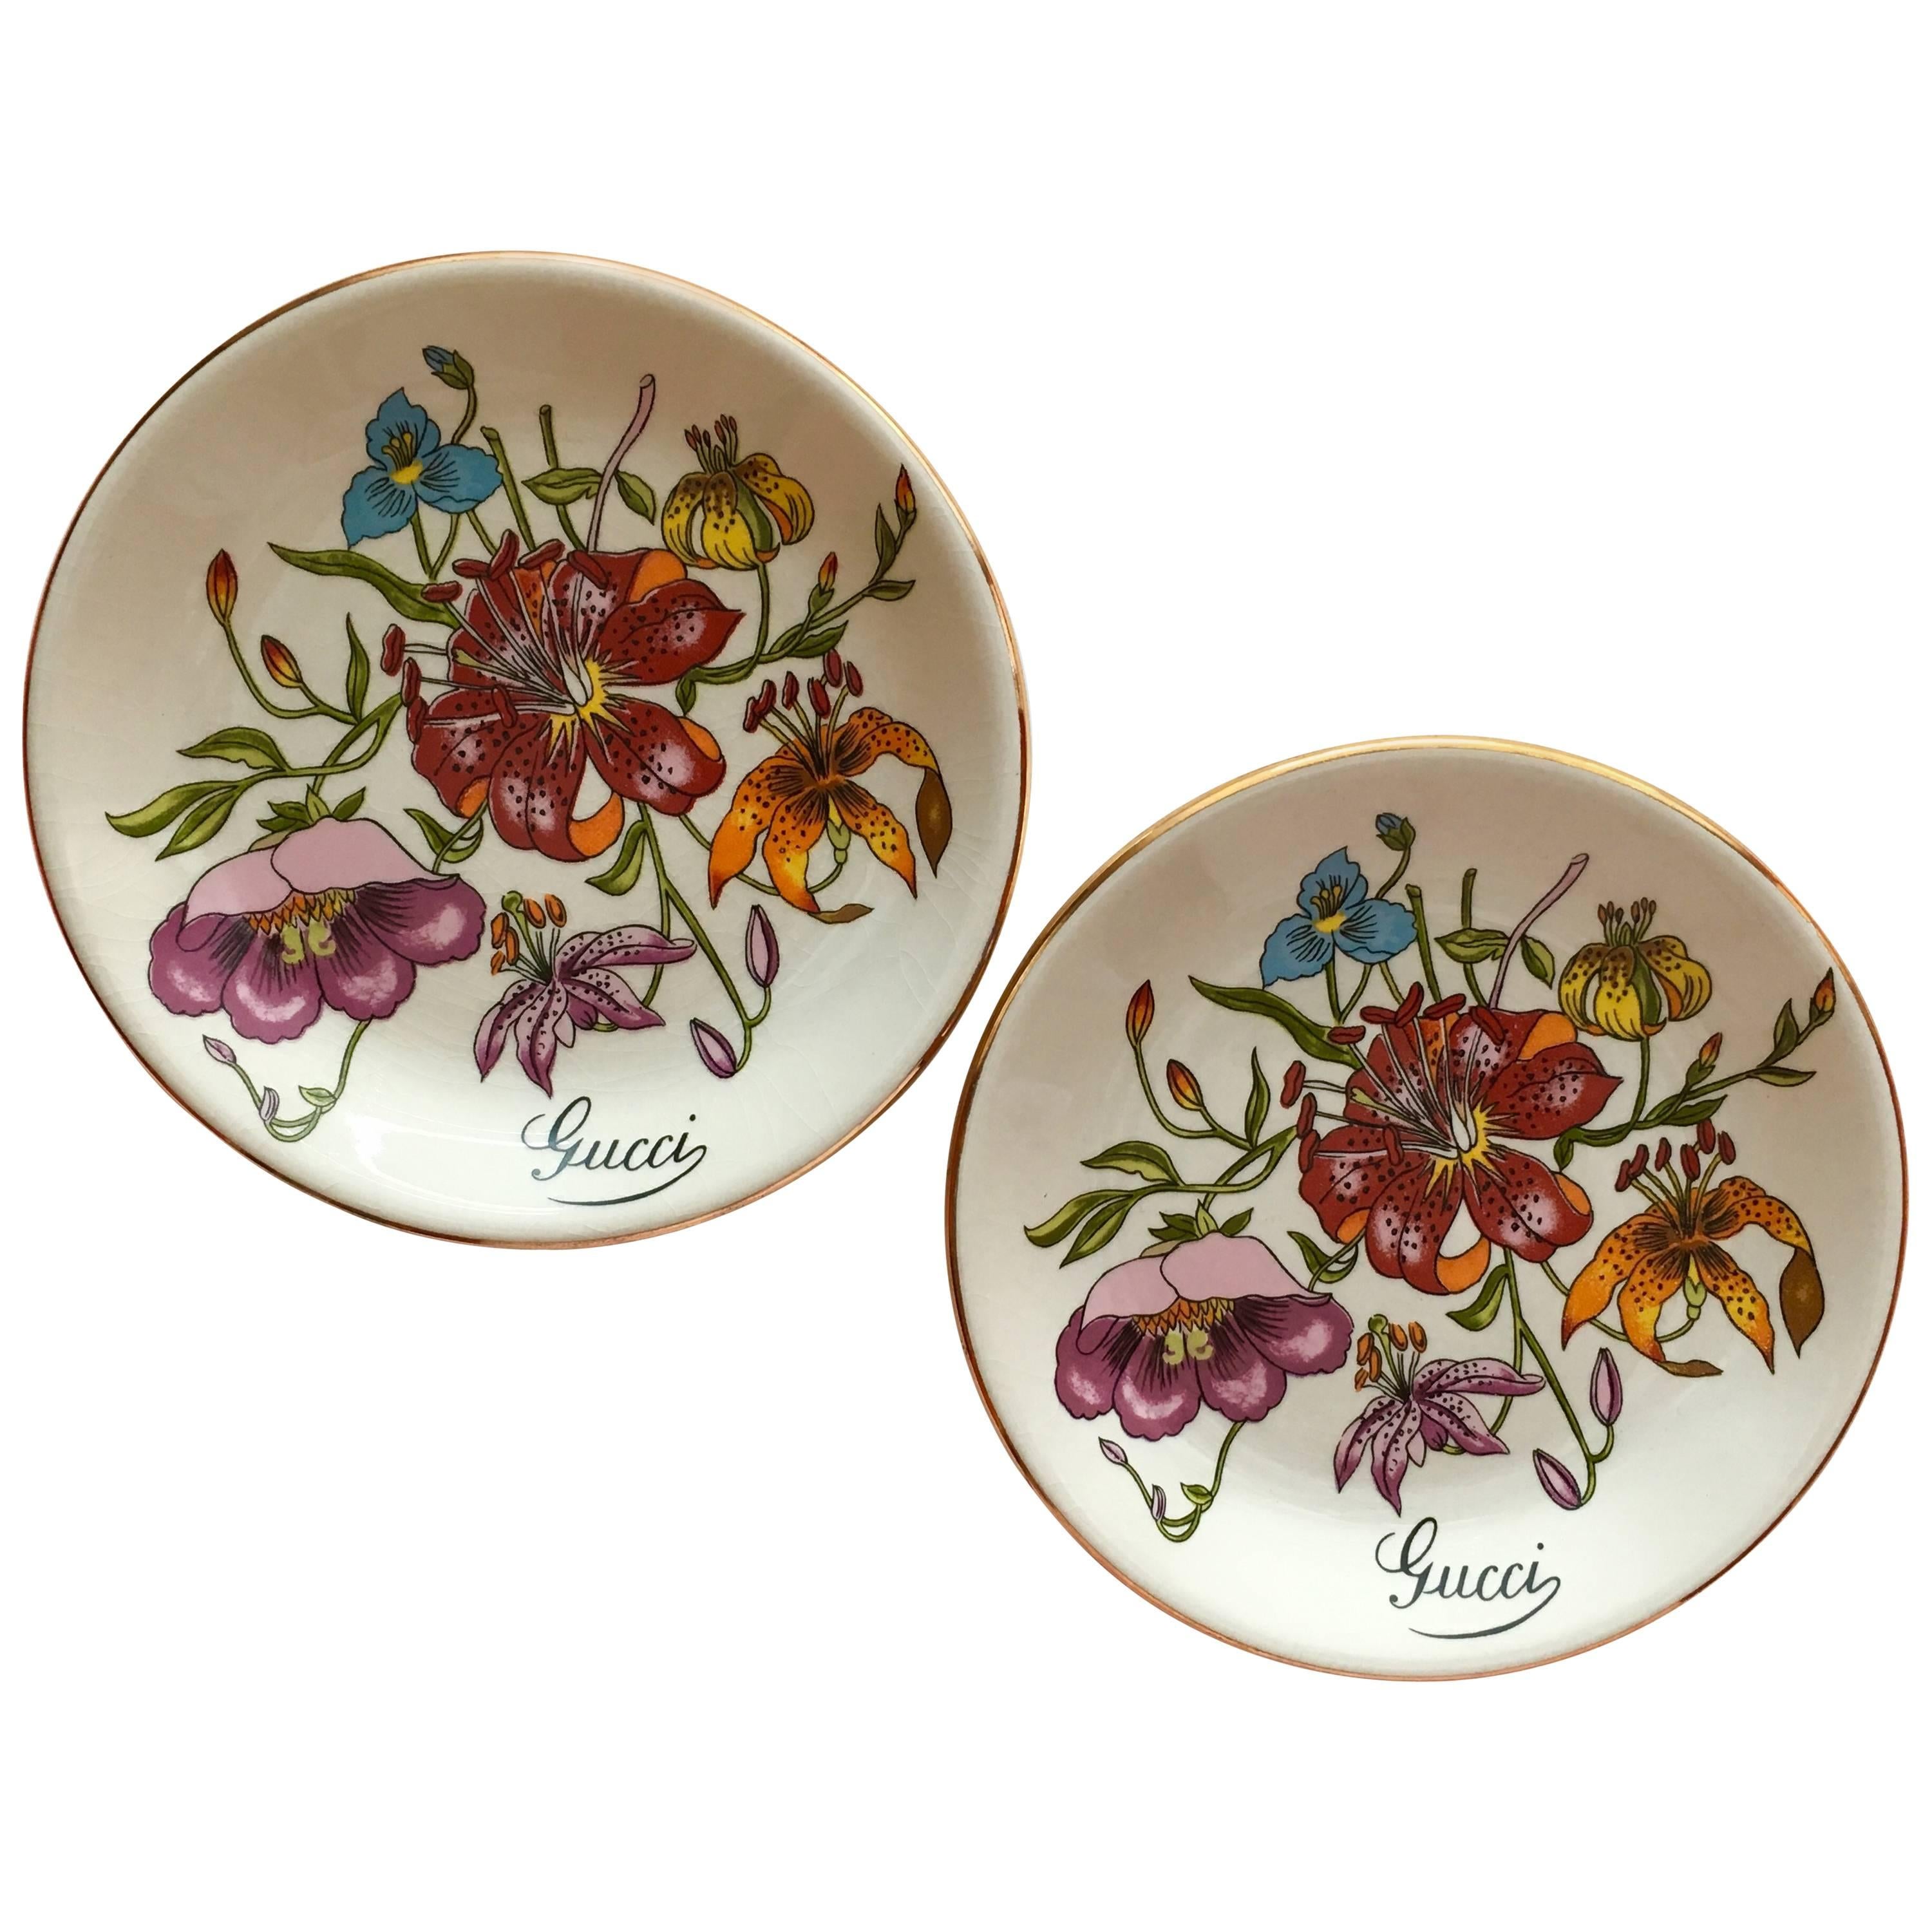 1970s Gucci Floral Trinket or Jewelry Dishes in Original Box